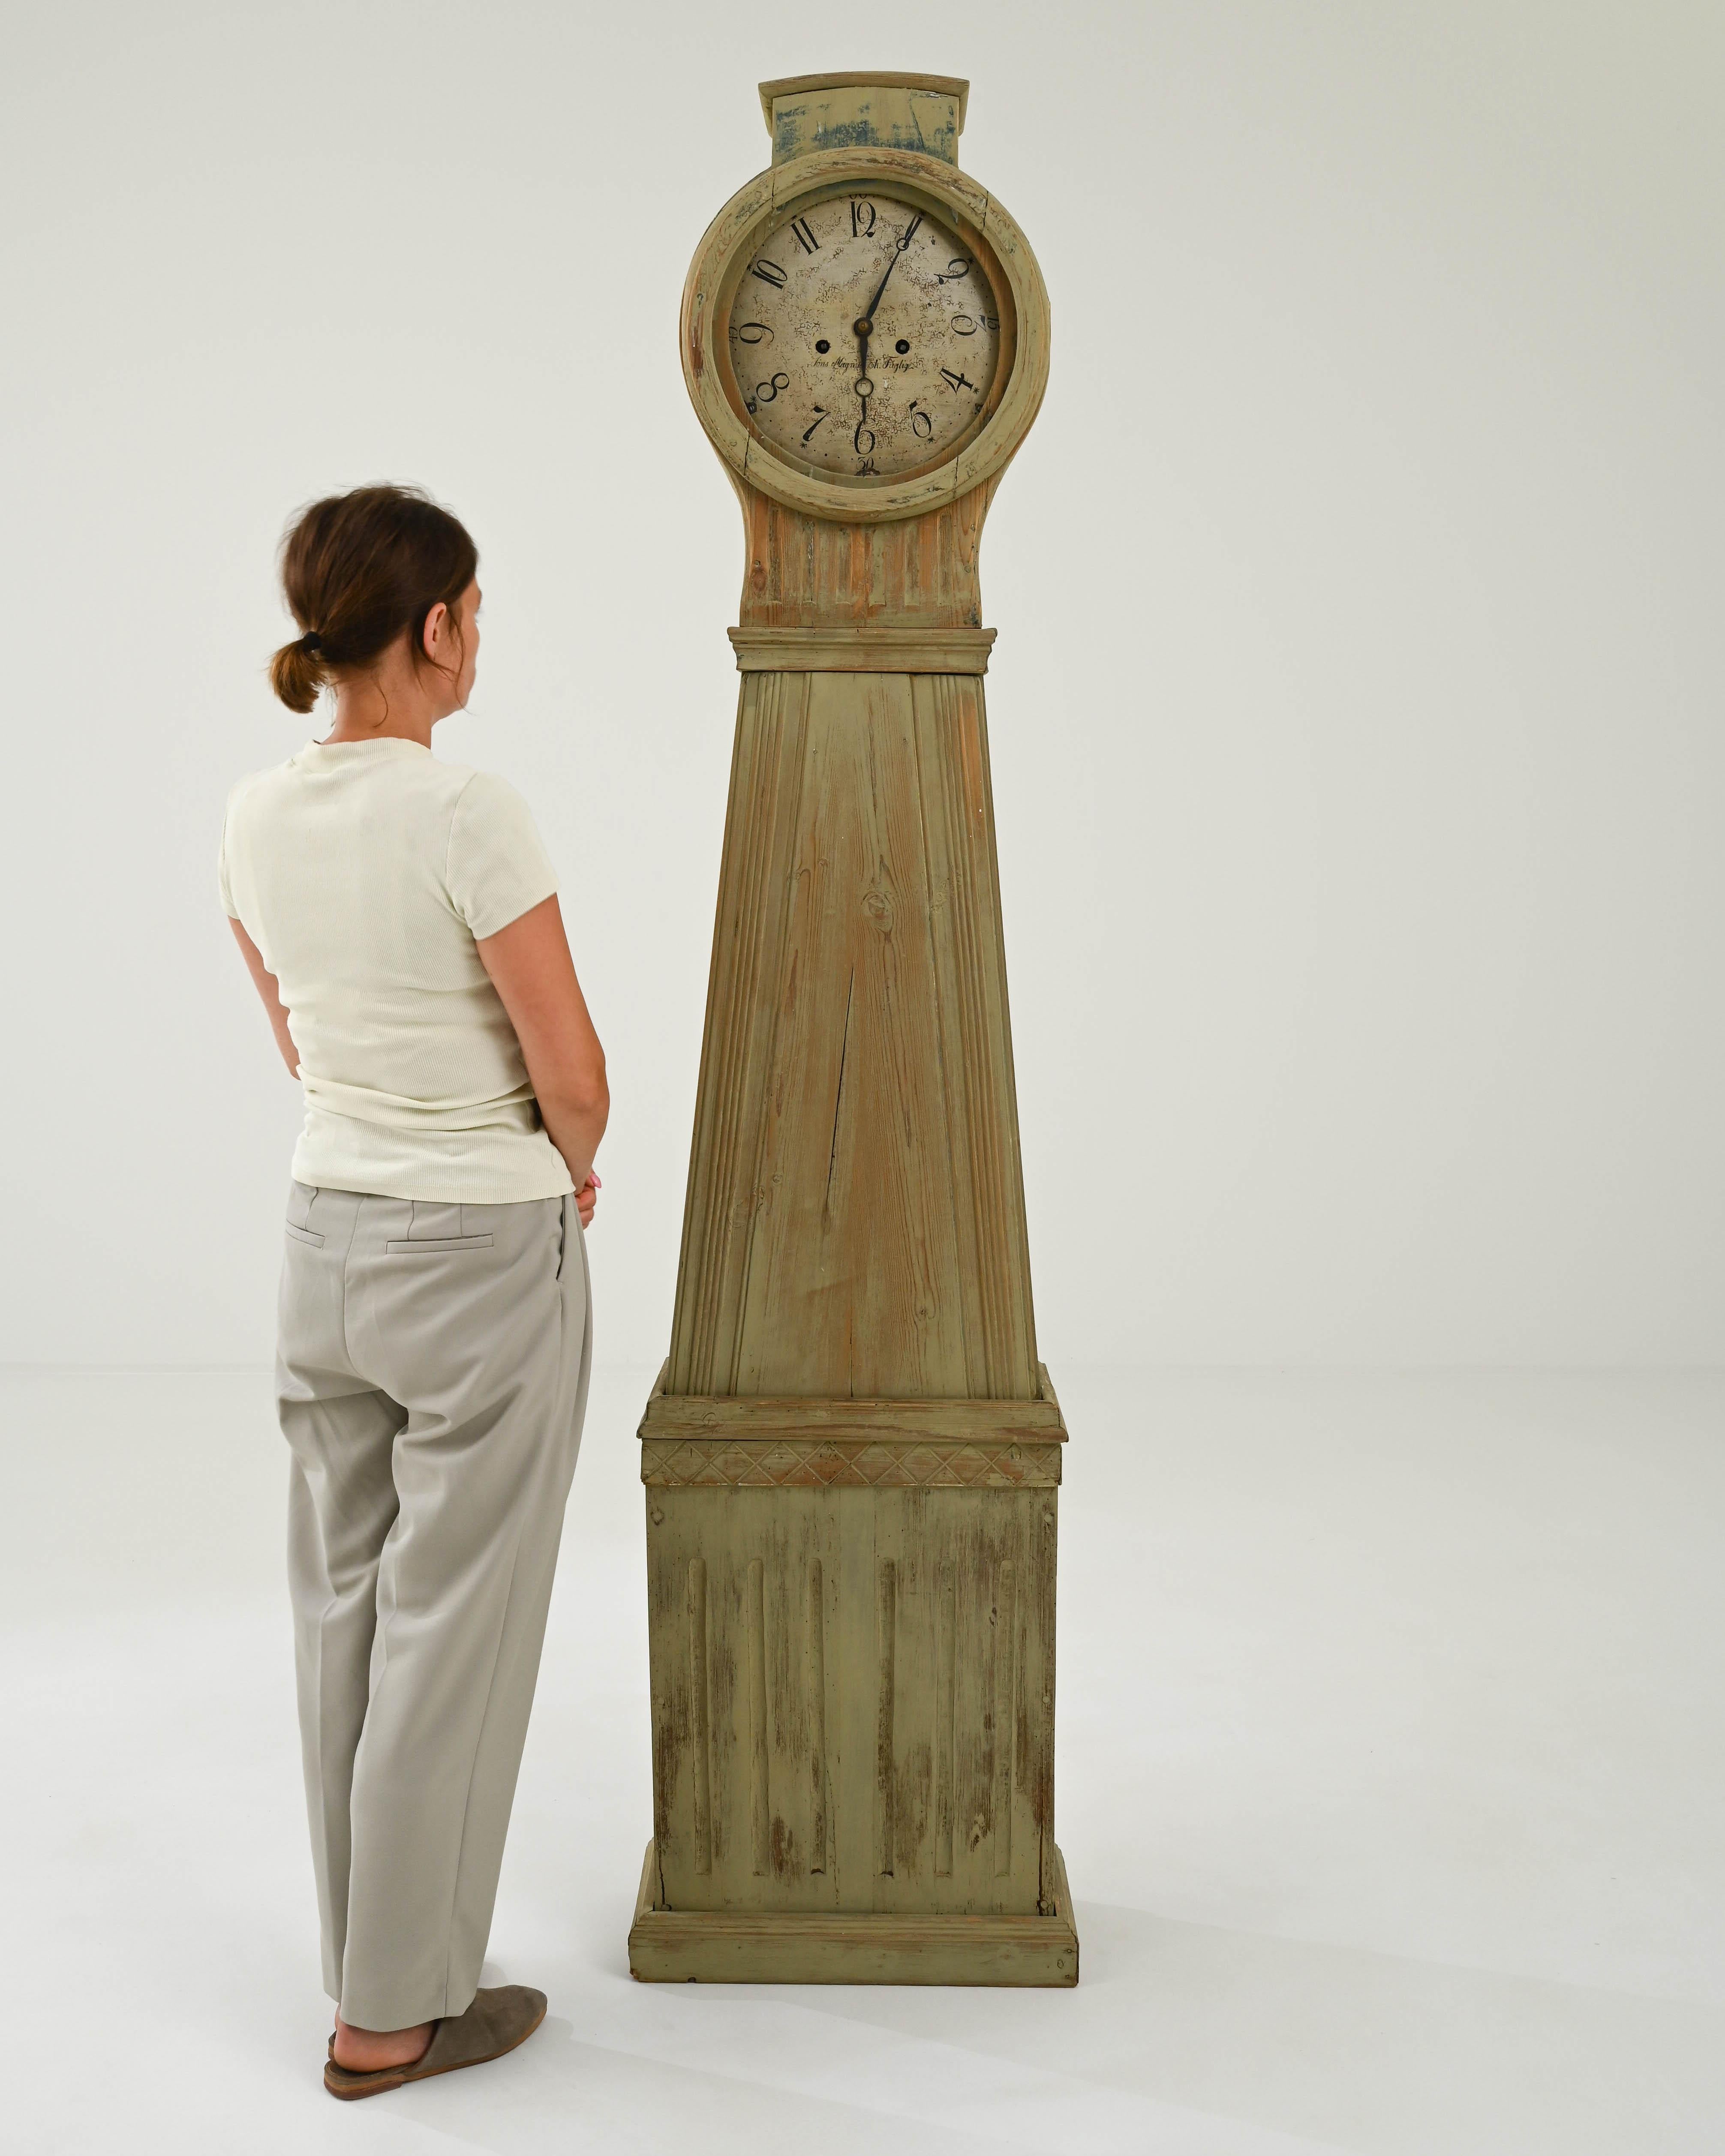 This antique wooden clock combines a striking silhouette with a muted patina. Built in Sweden in the early 1800s, the elegant simplicity of the design reflects the Gustavian style in vogue at the time. Clean lines and the pyramidal shape of the